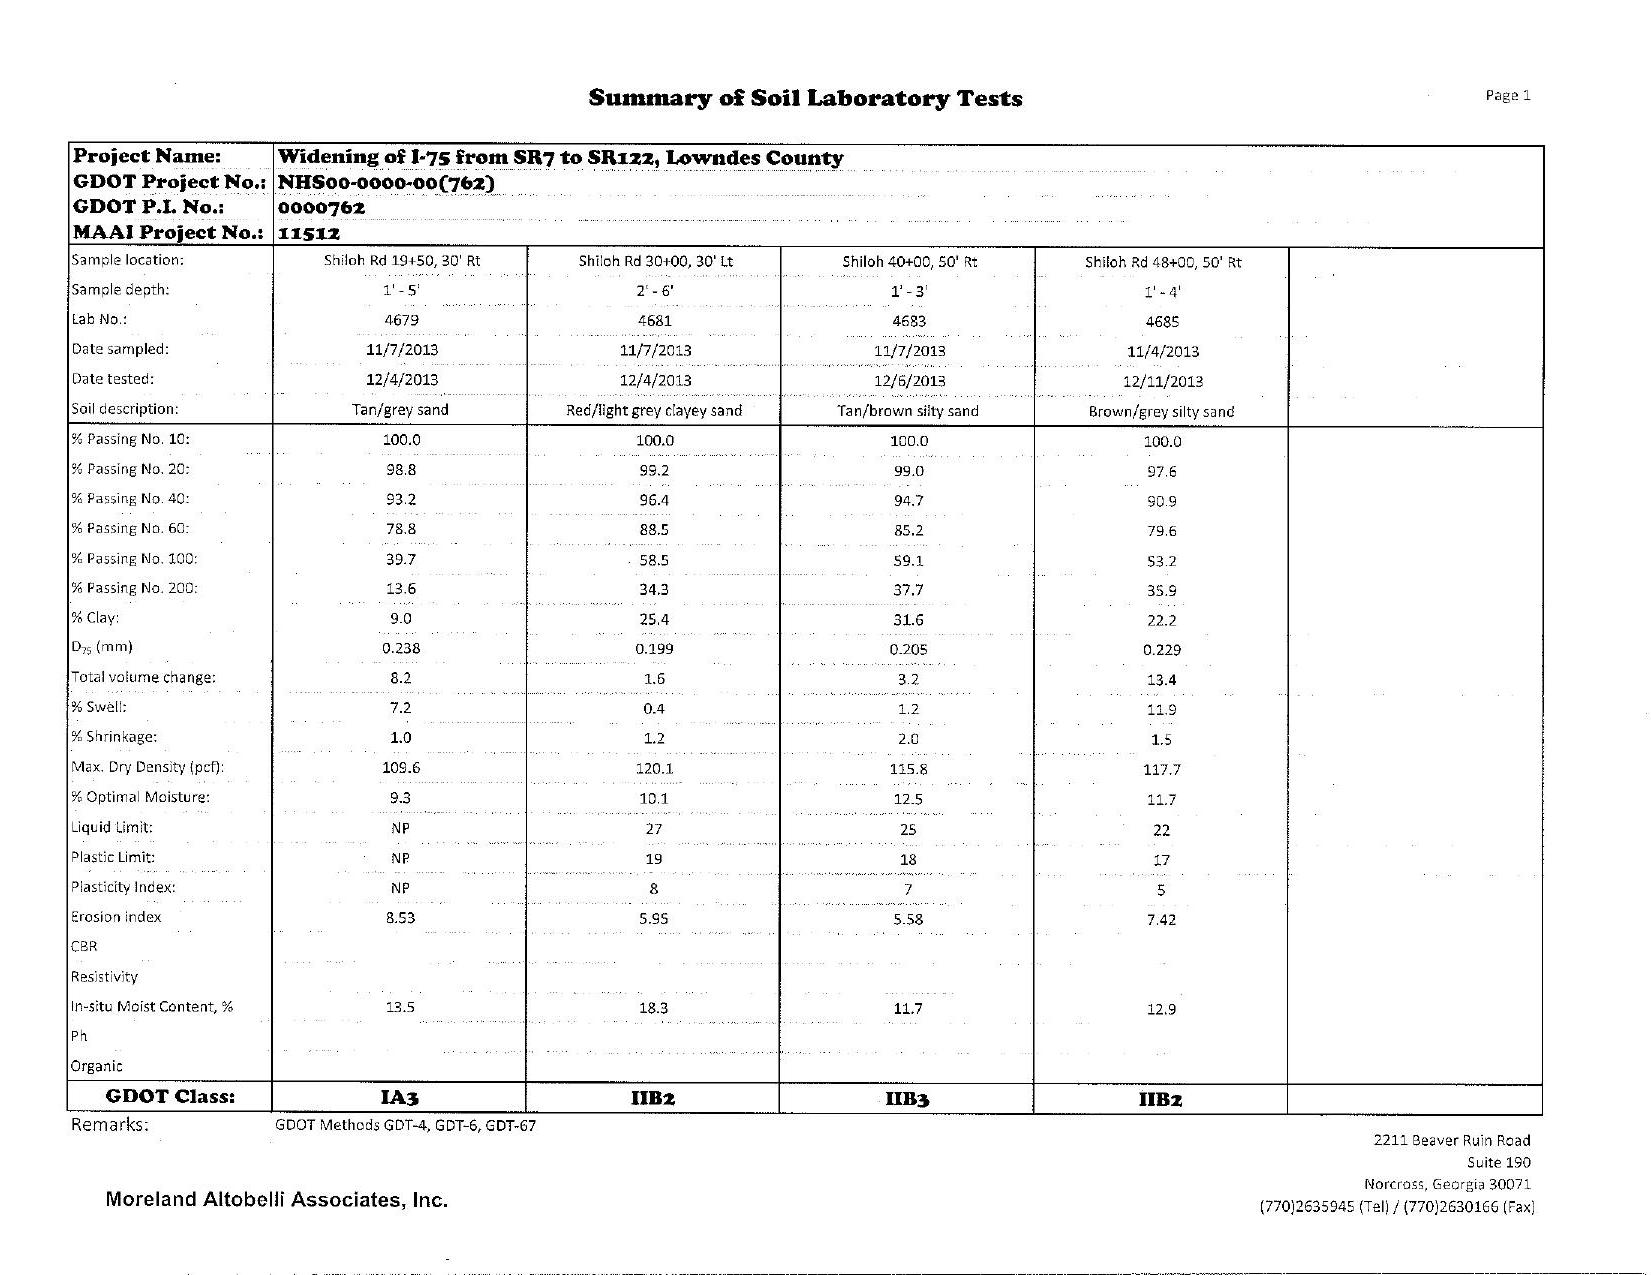 Summary of Soil Laboratory Tests (1 of 9)